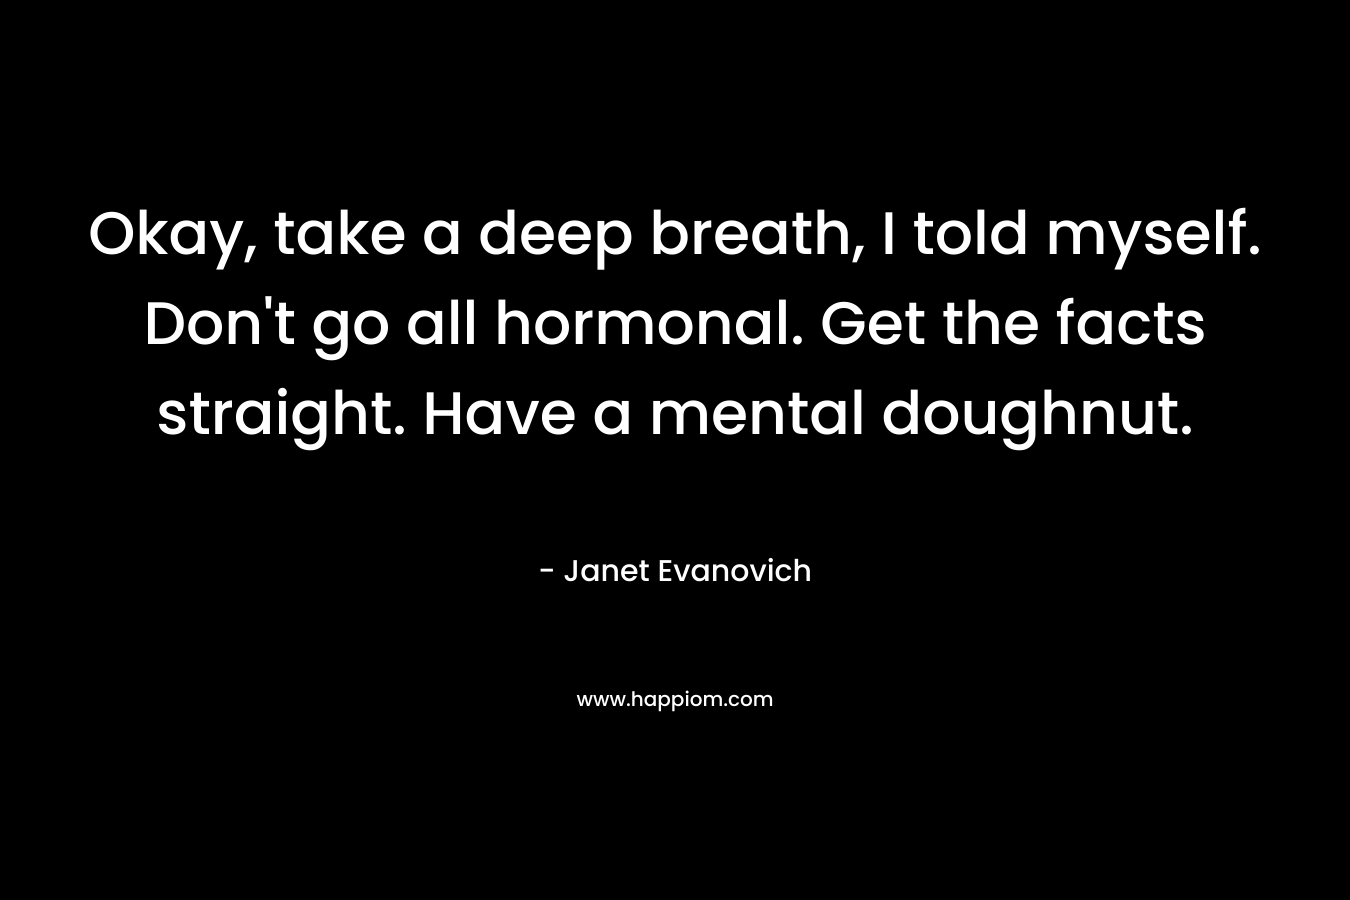 Okay, take a deep breath, I told myself. Don't go all hormonal. Get the facts straight. Have a mental doughnut.